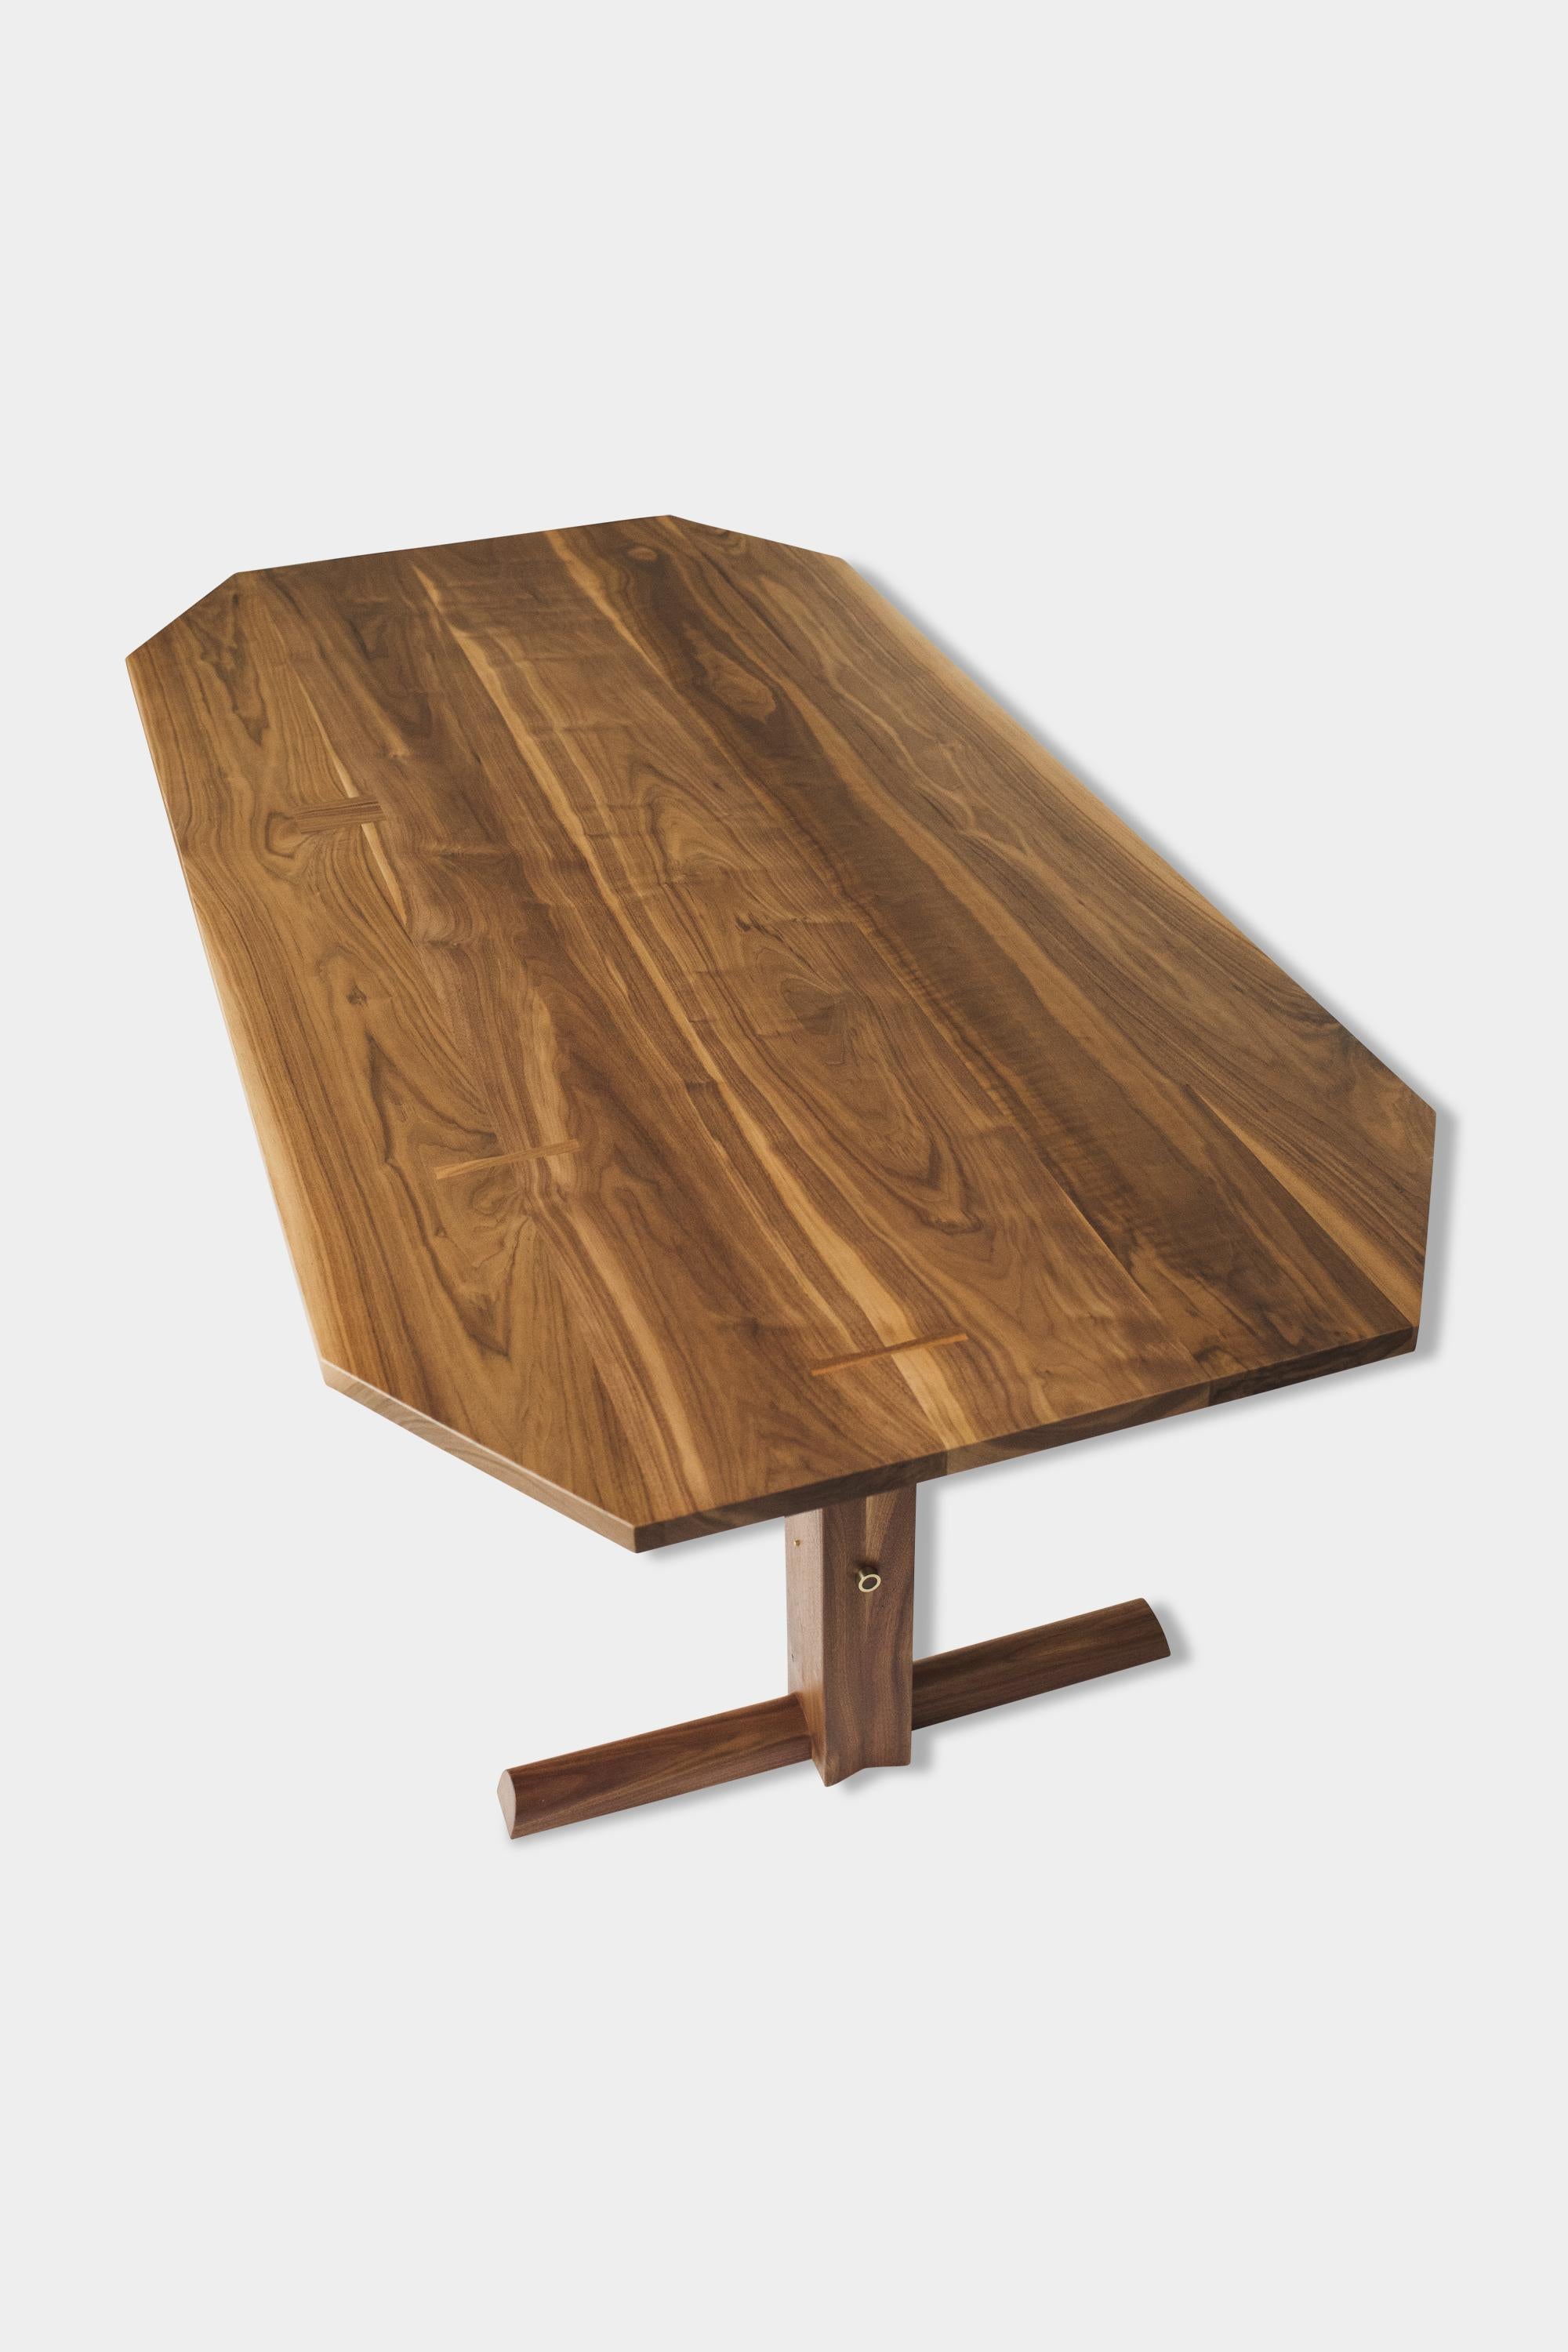 Handmade dining table with a double-ship mast inspired trestle base. Solid wood tops feature clipped corners and individualized dutchman joints. Each table uniquely accentuates and utilizes the natural characteristics of the lumber we source. This